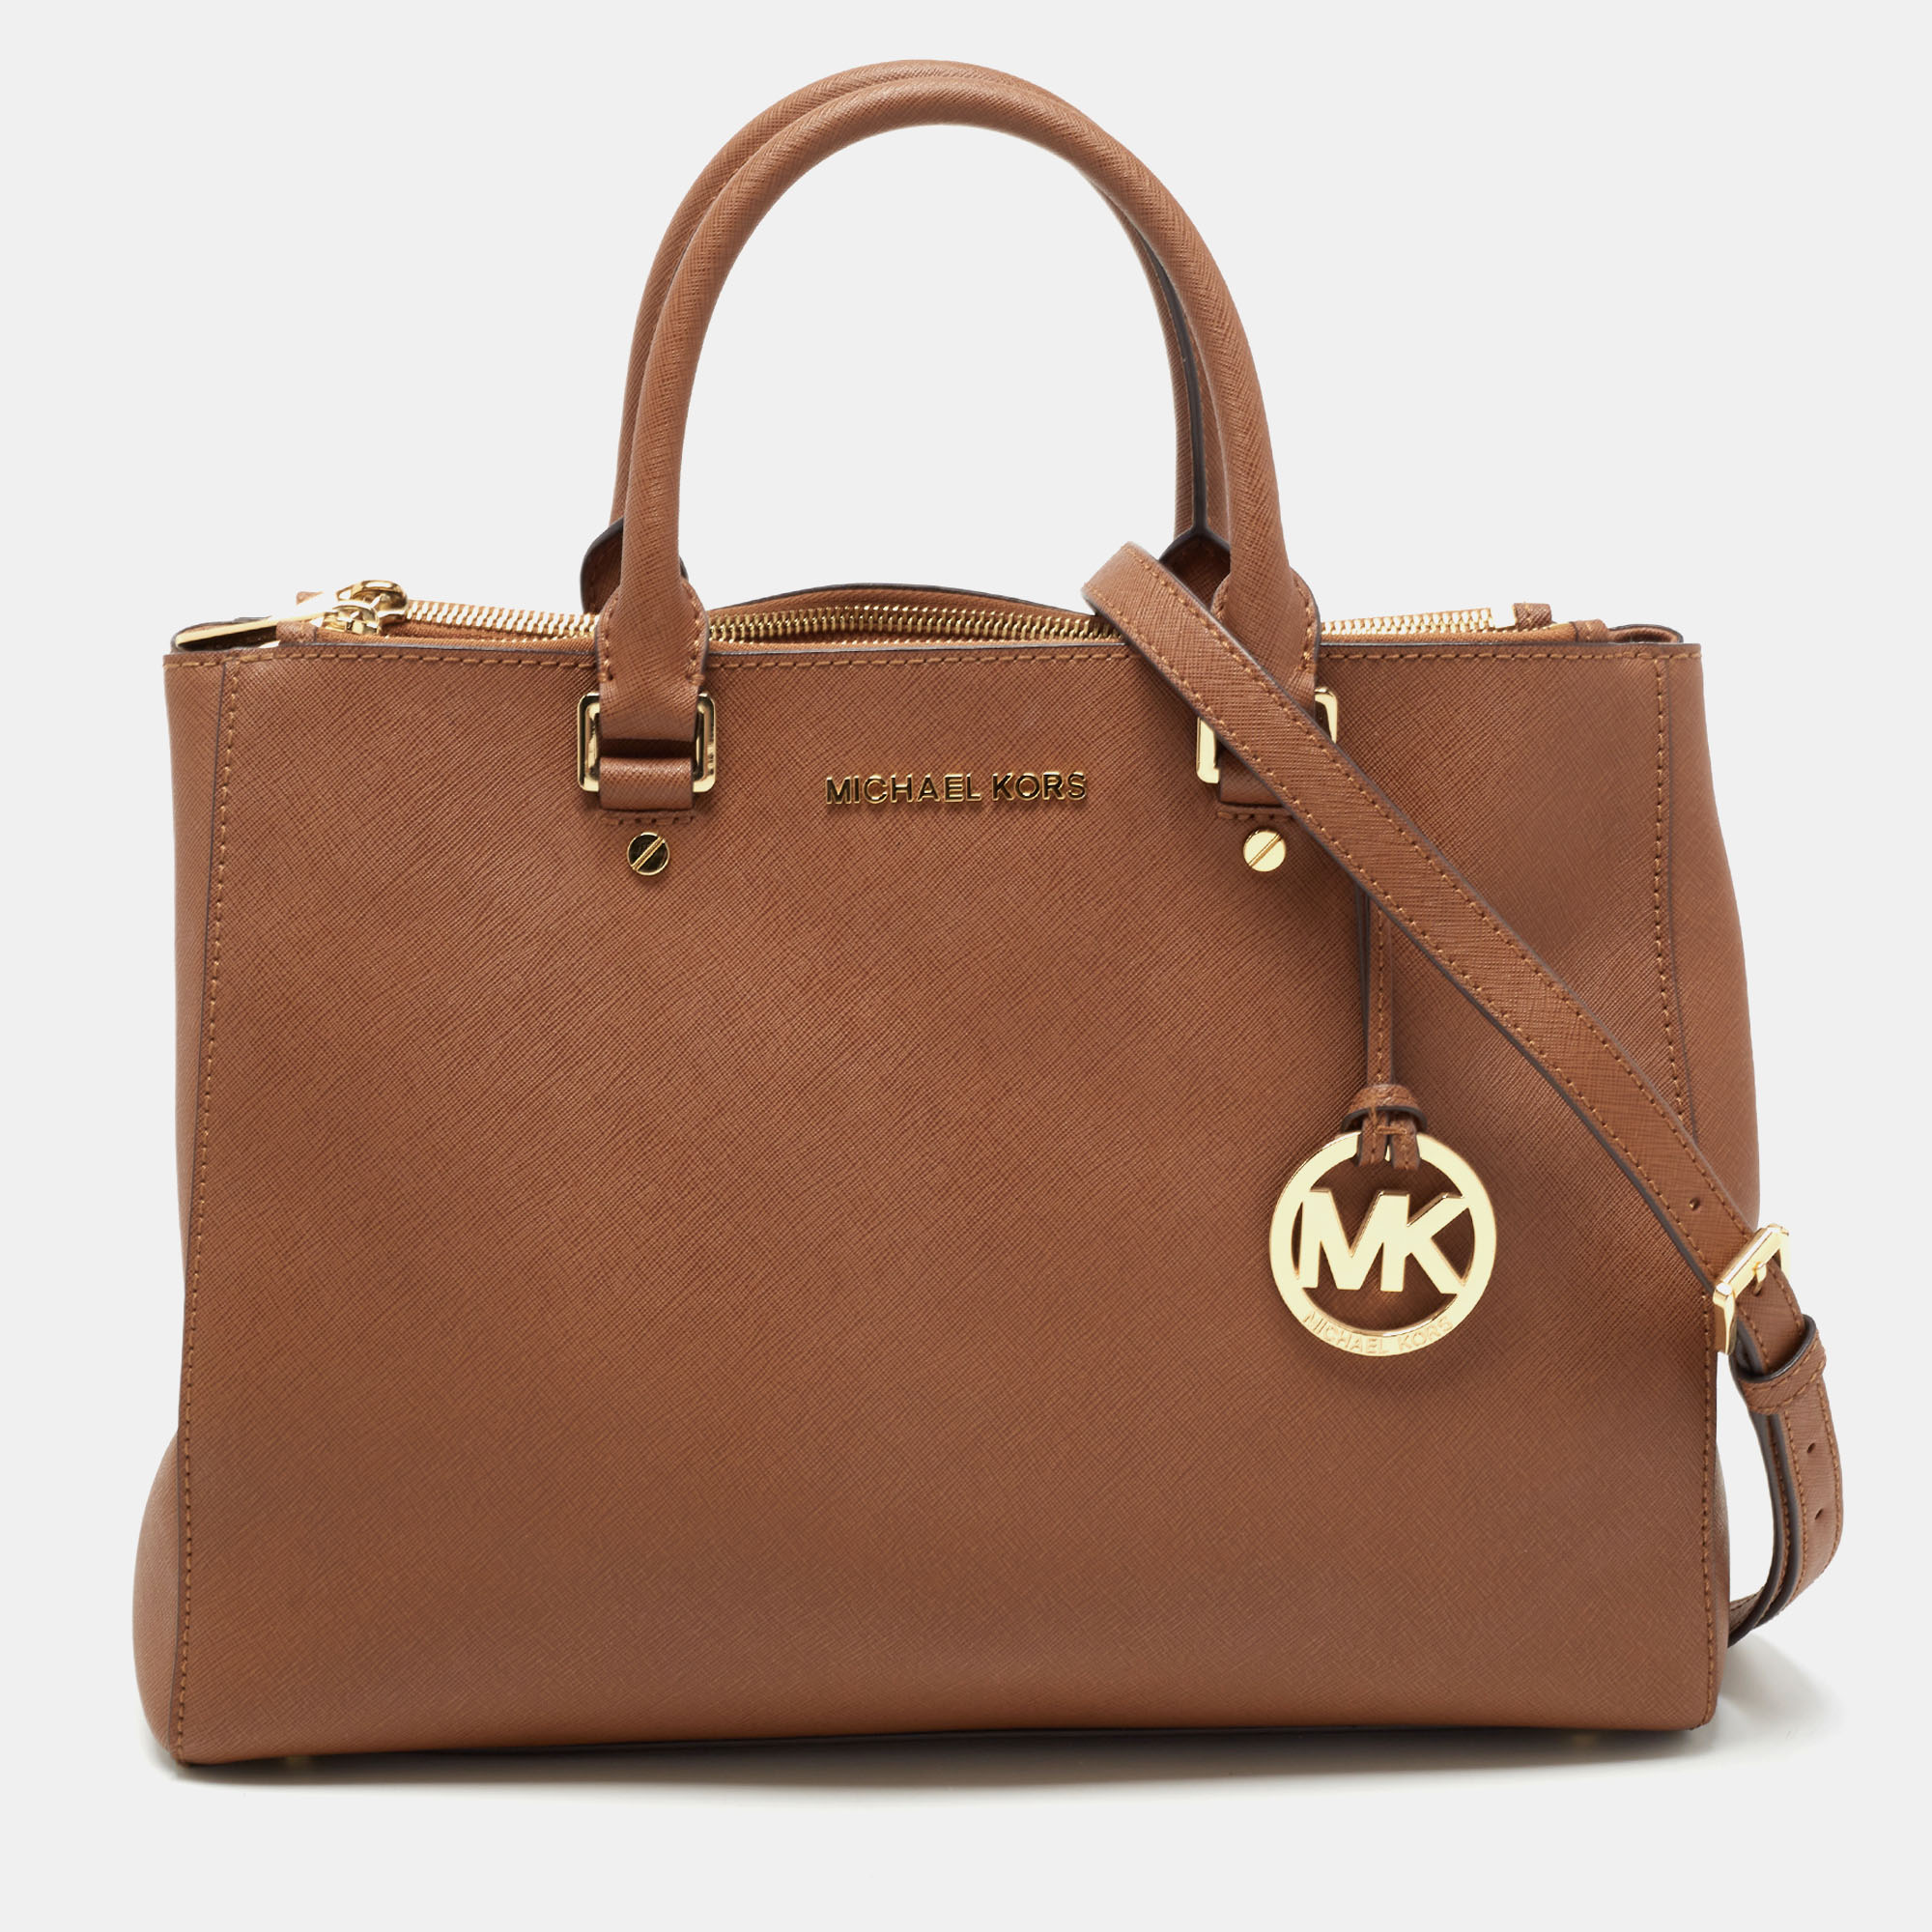 Pre-owned Michael Michael Kors Brown Saffiano Leather Large Sutton Tote